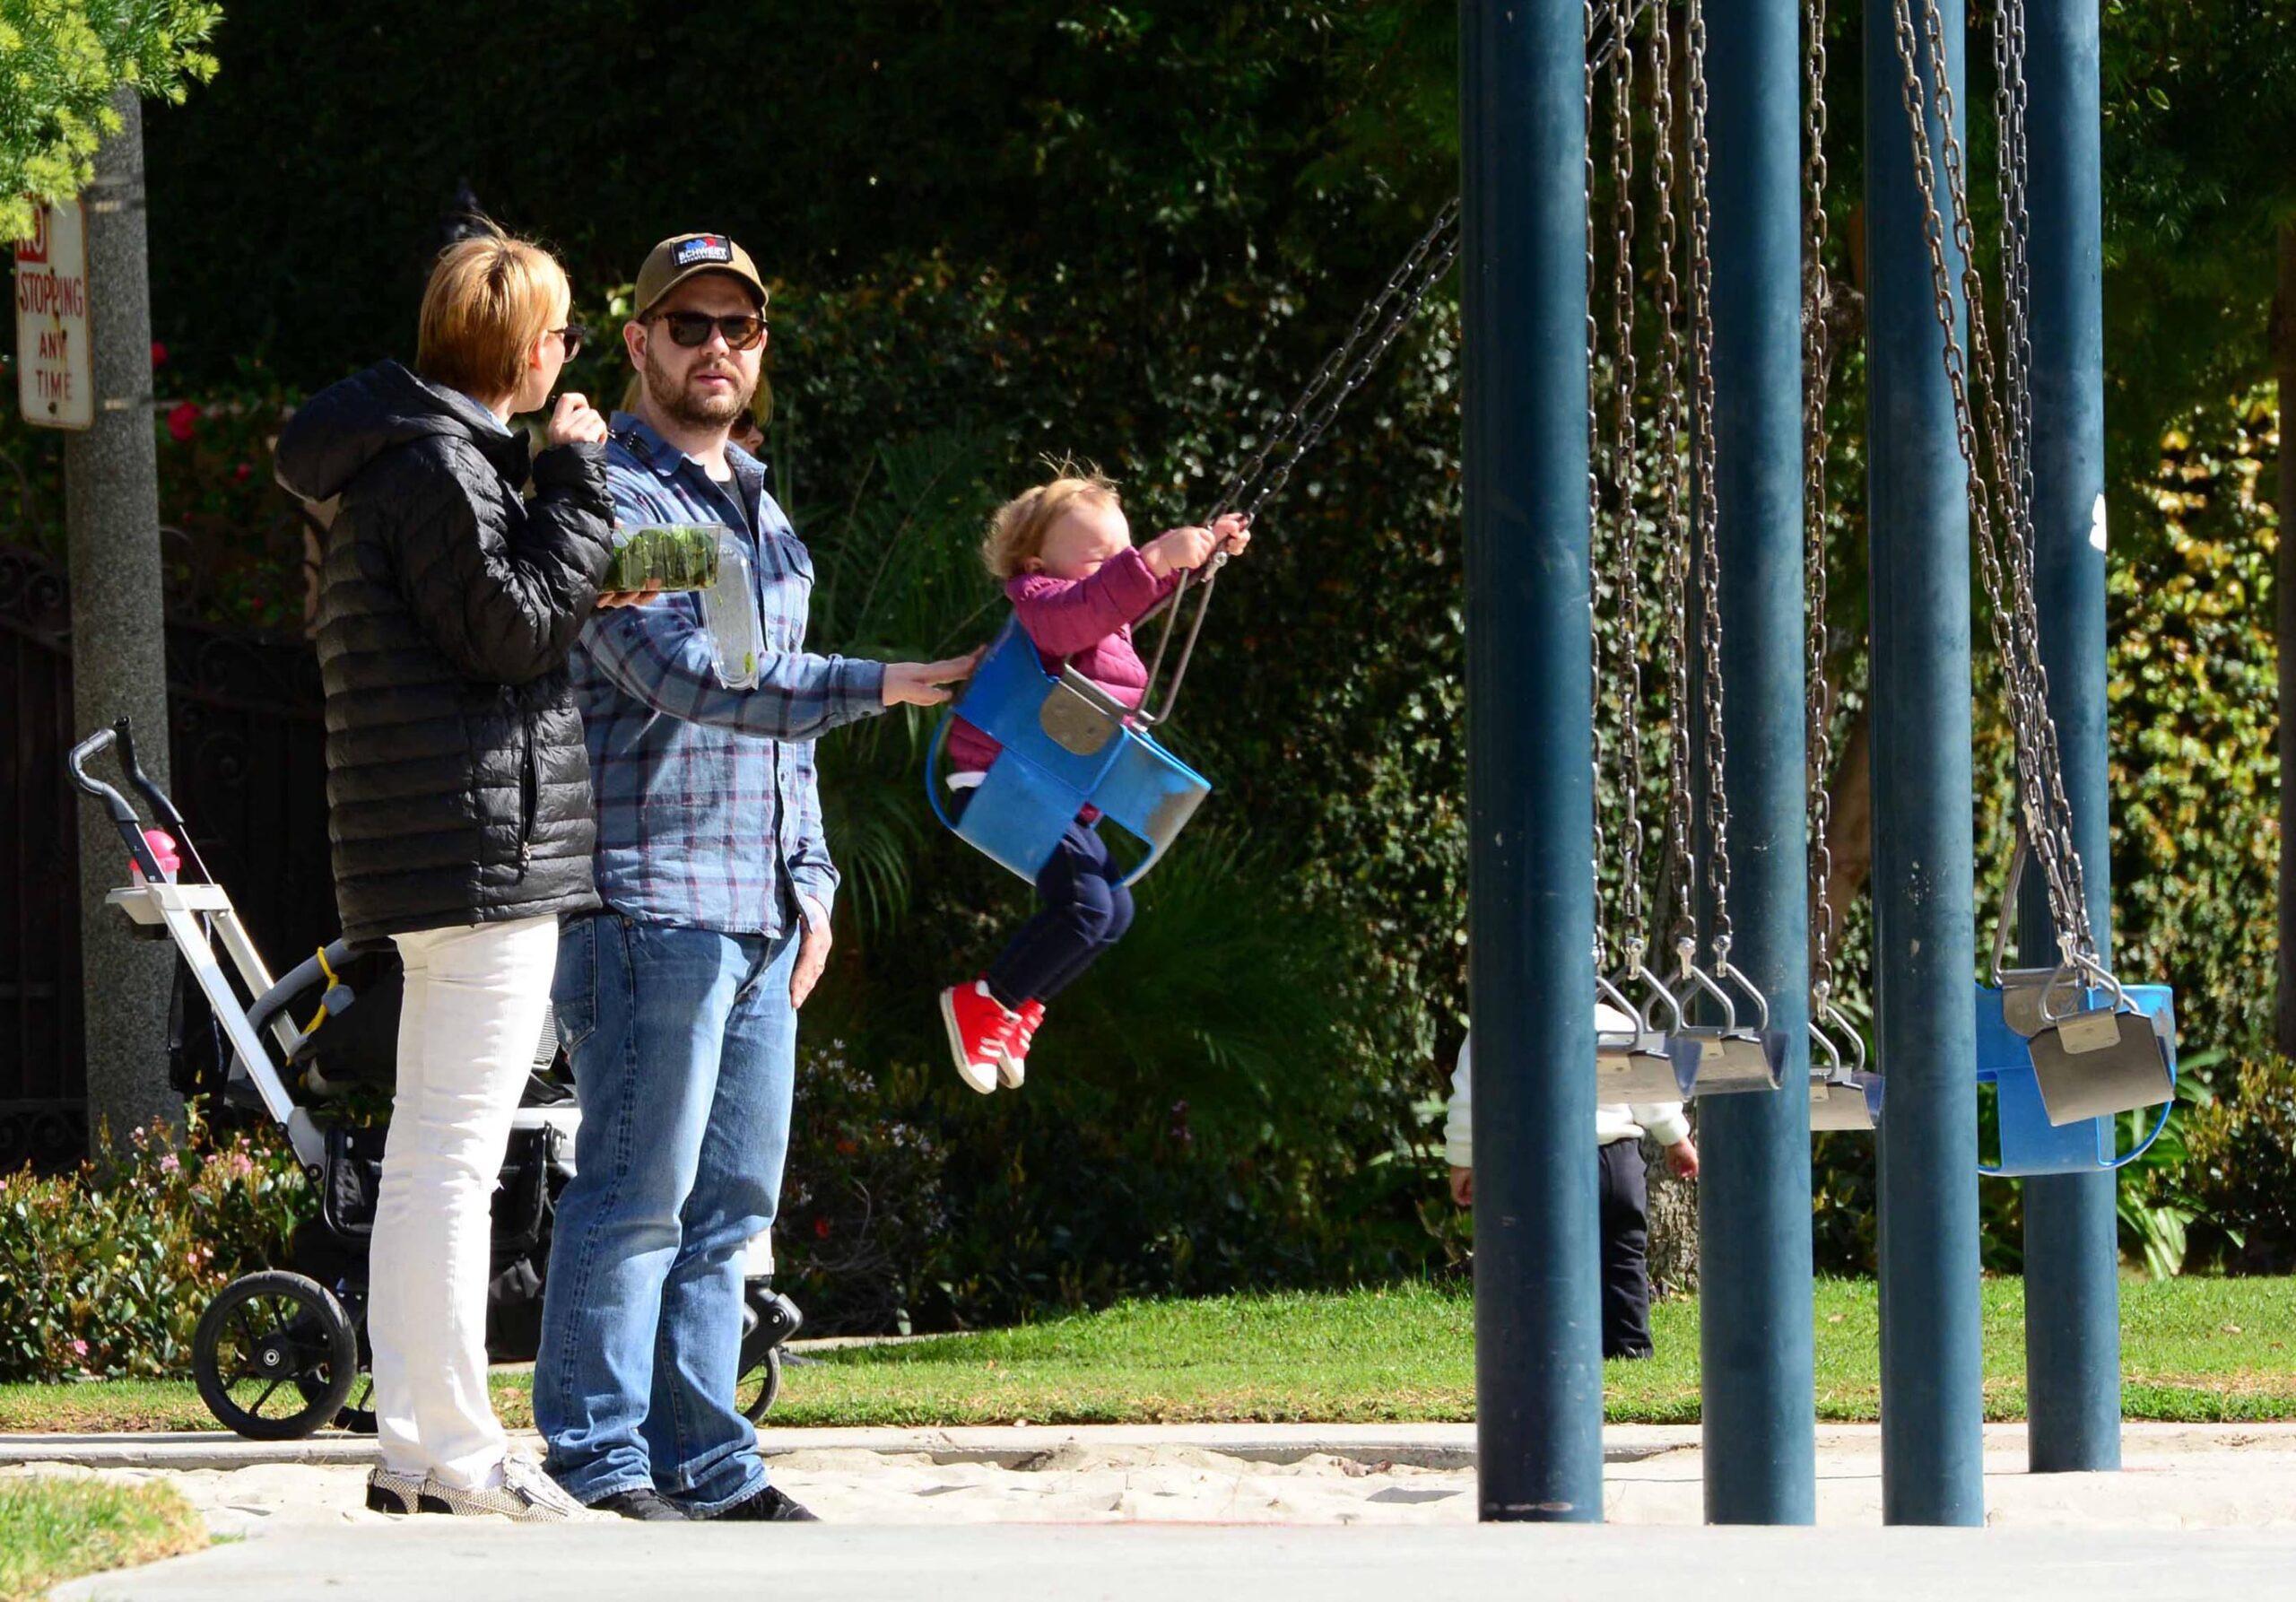 JACK OSBOURNE AND FAMILY AT THE PARK IN BEVERLY HILLS